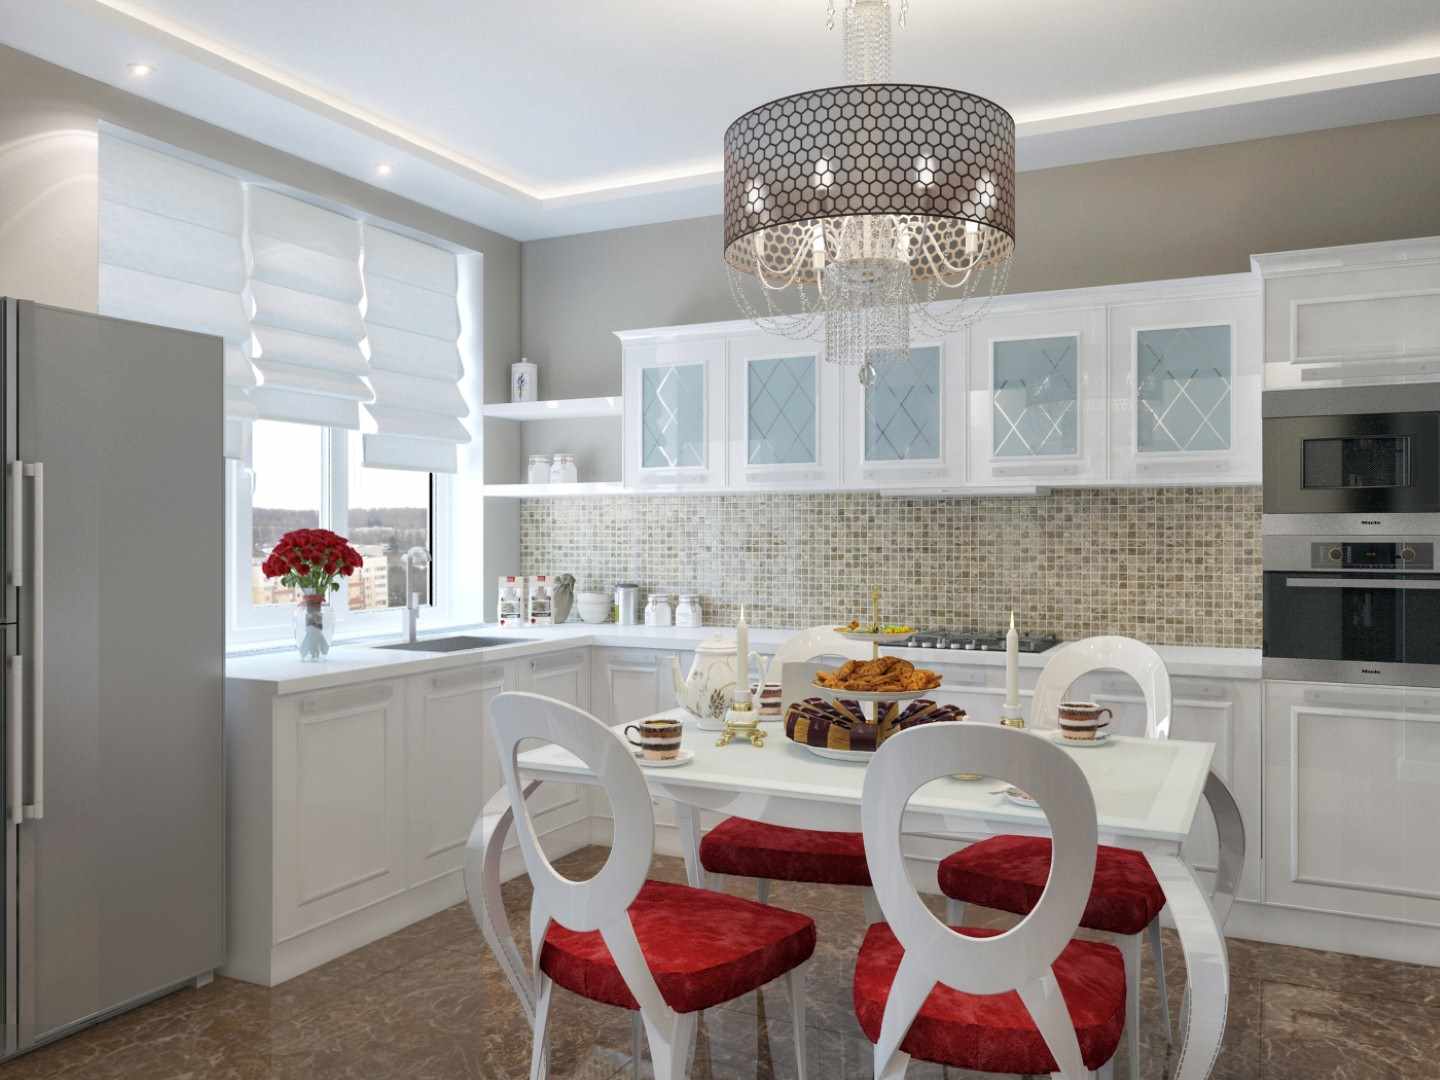 An example of a beautiful kitchen design project